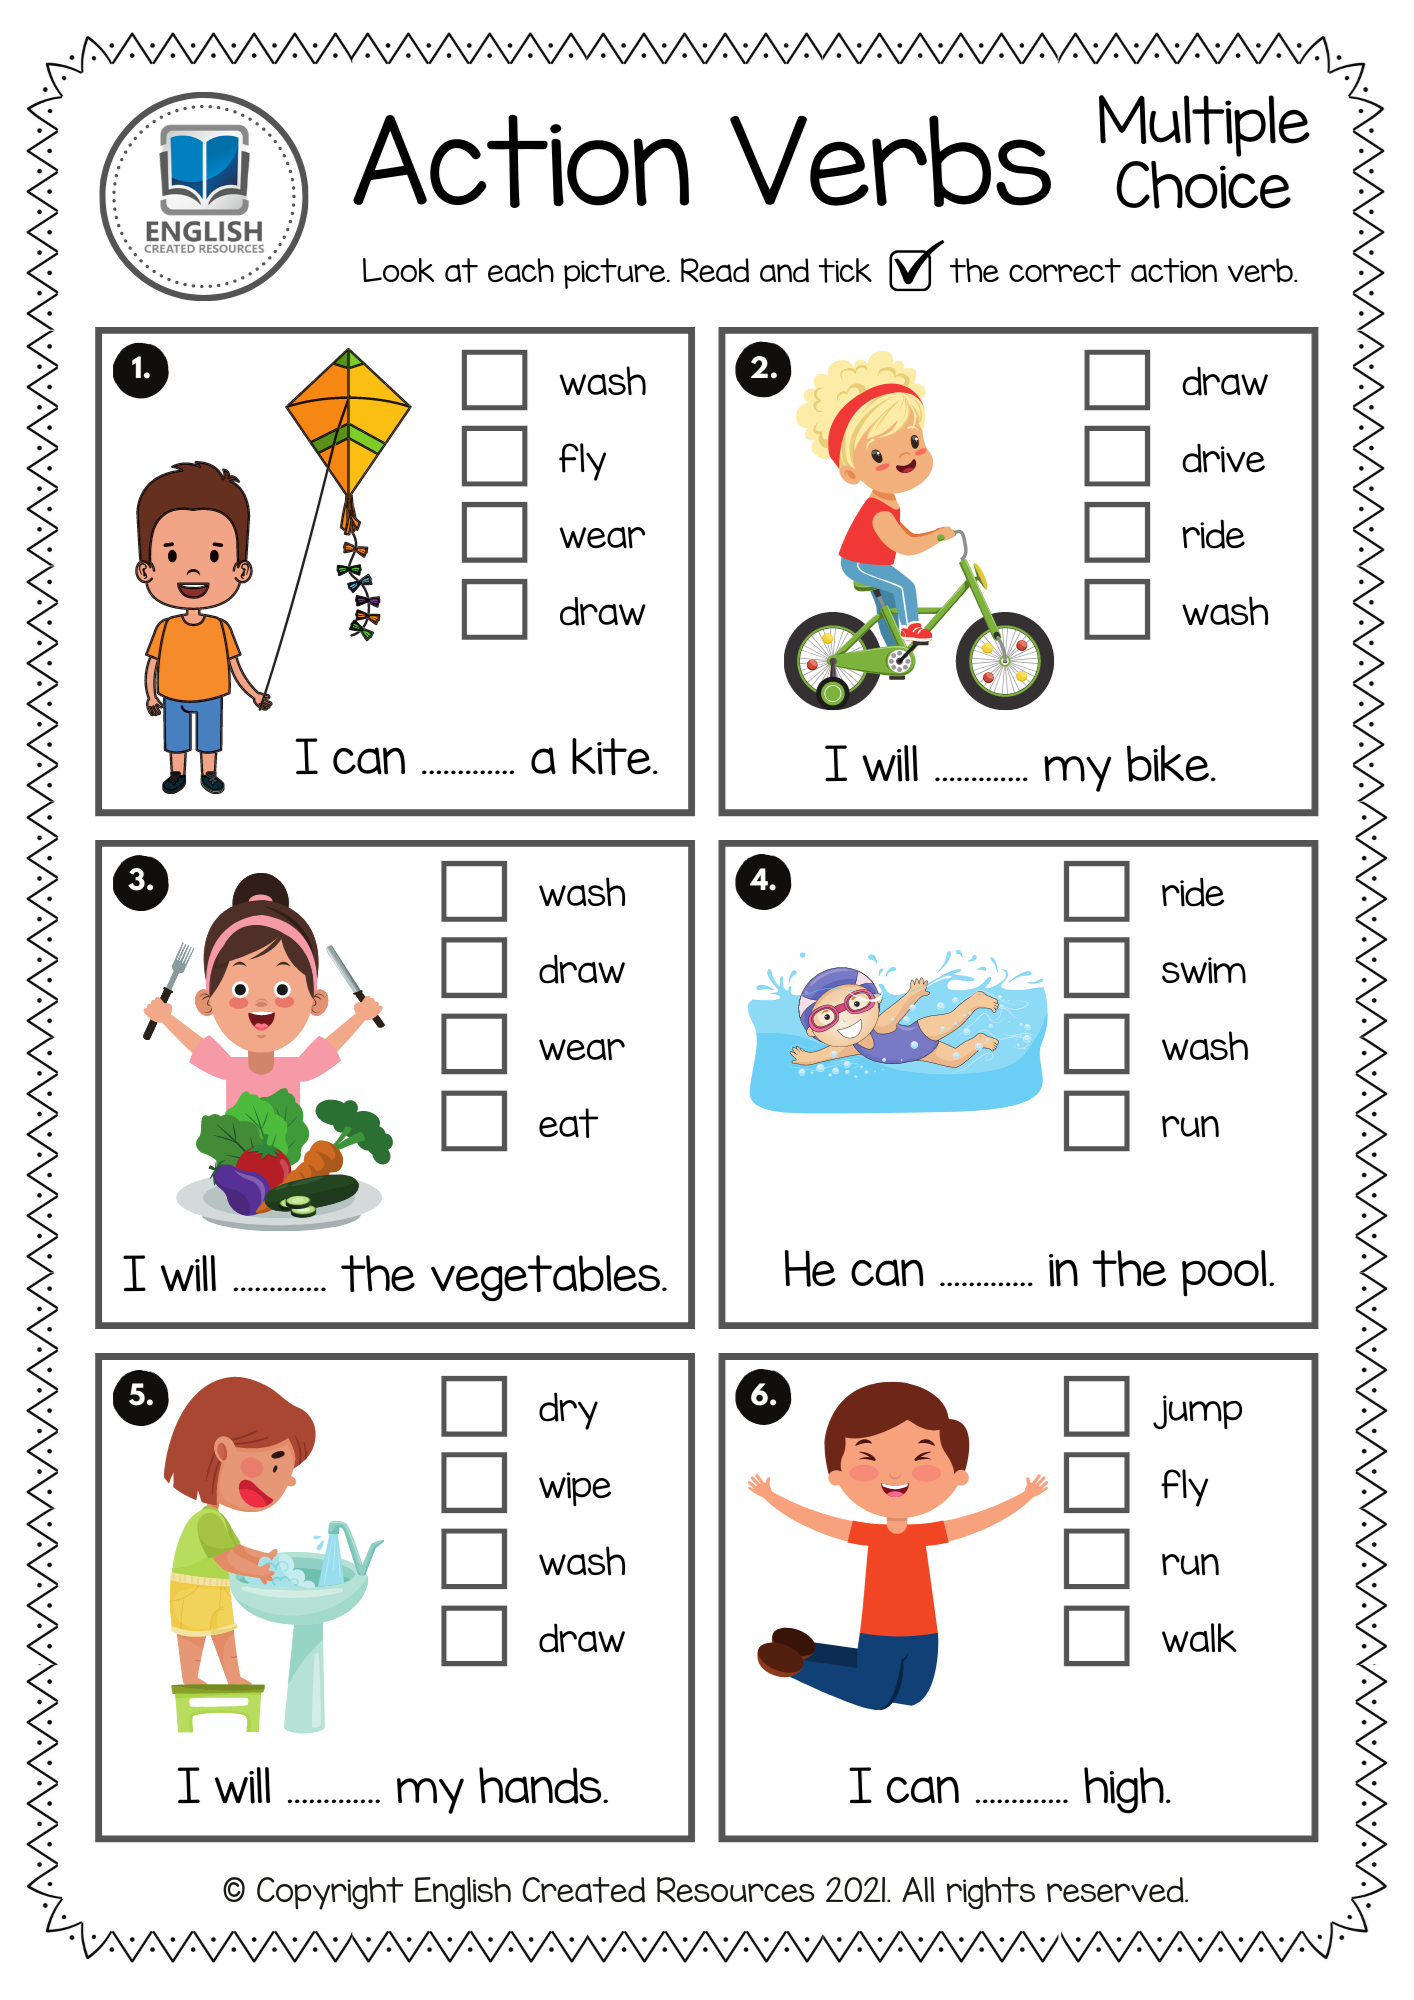 action-verbs-worksheets-action-verbs-online-activity-for-inicial-you-can-do-the-exercises